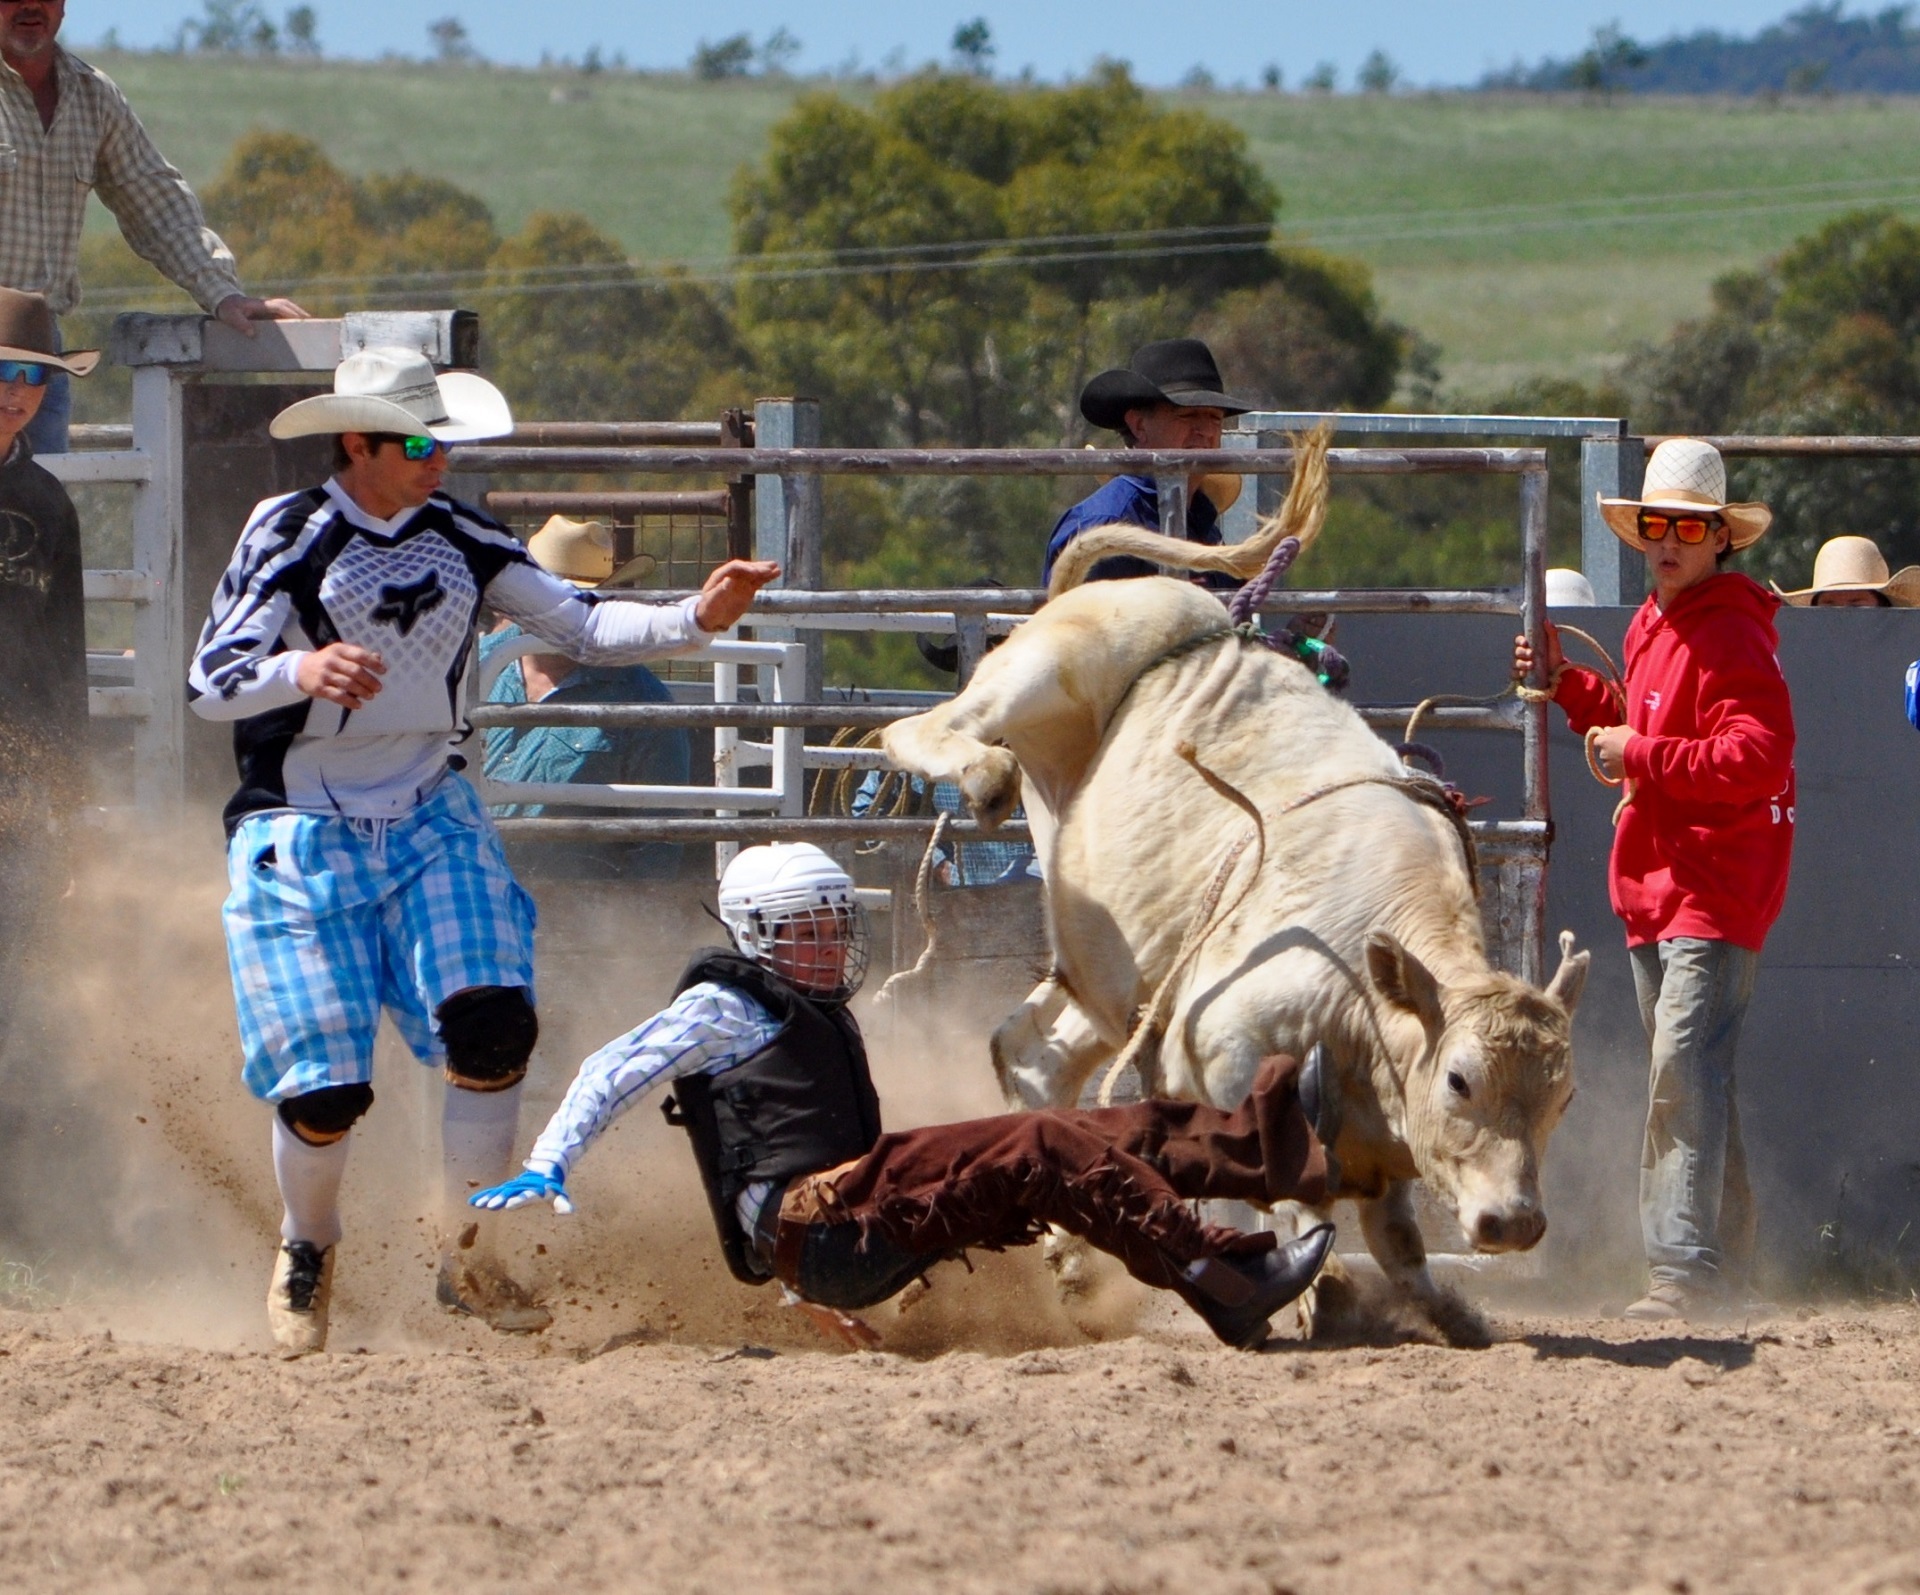 Thrown off a bucking bull in a rodeo by skeeze